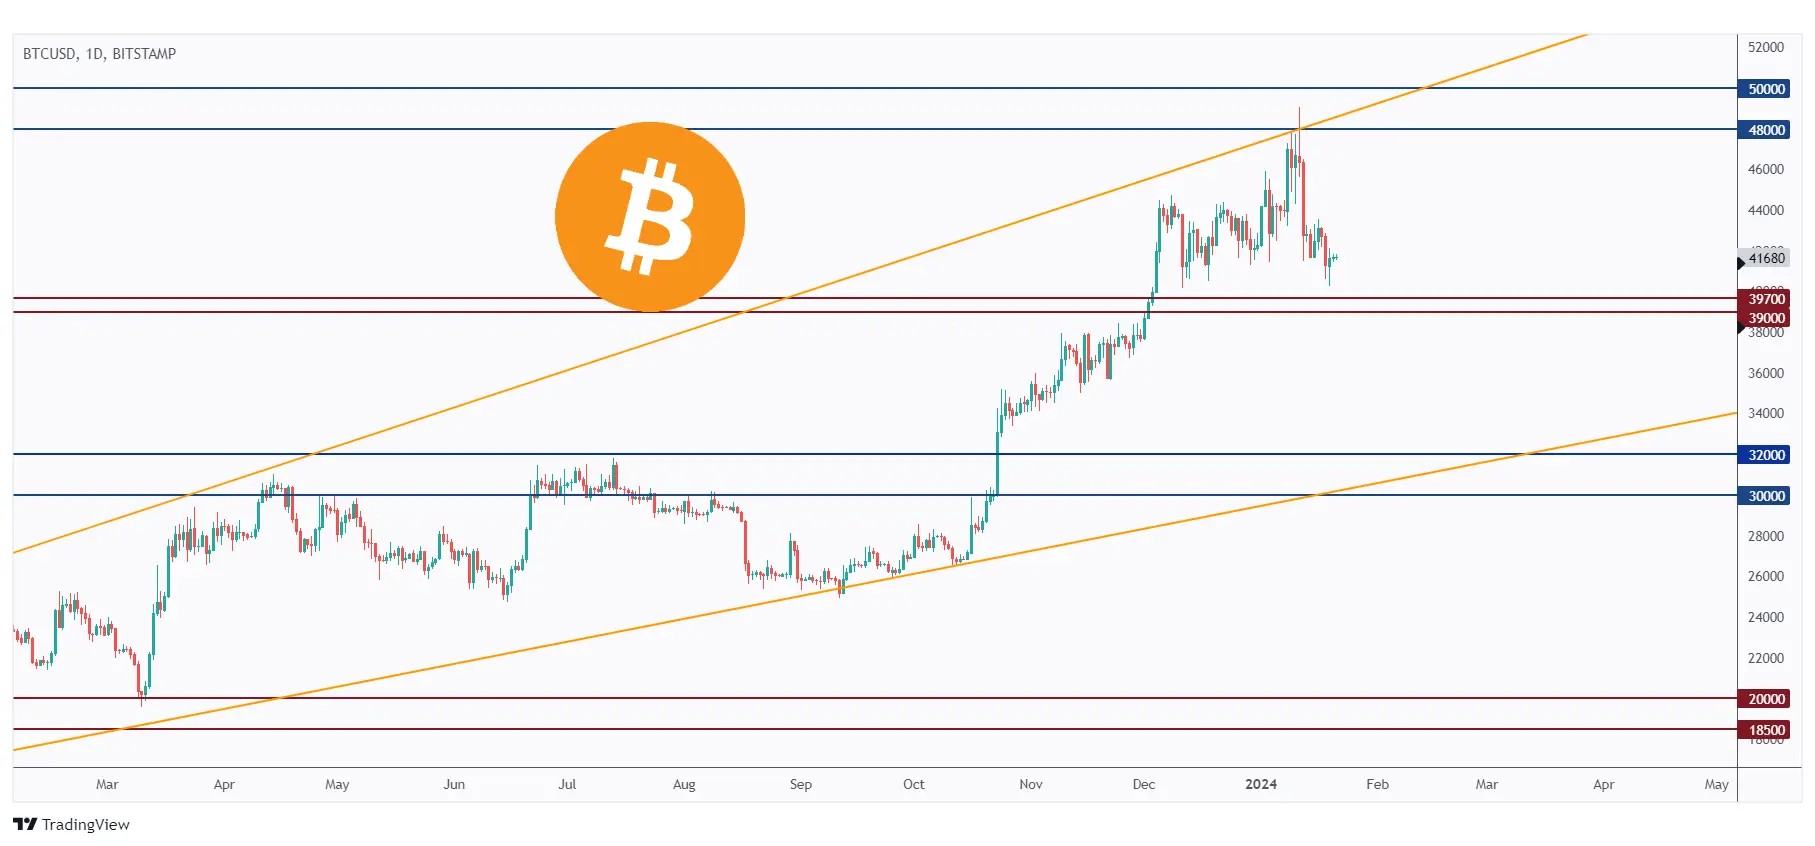 BTC daily chart approaching a strong support at $40,000.